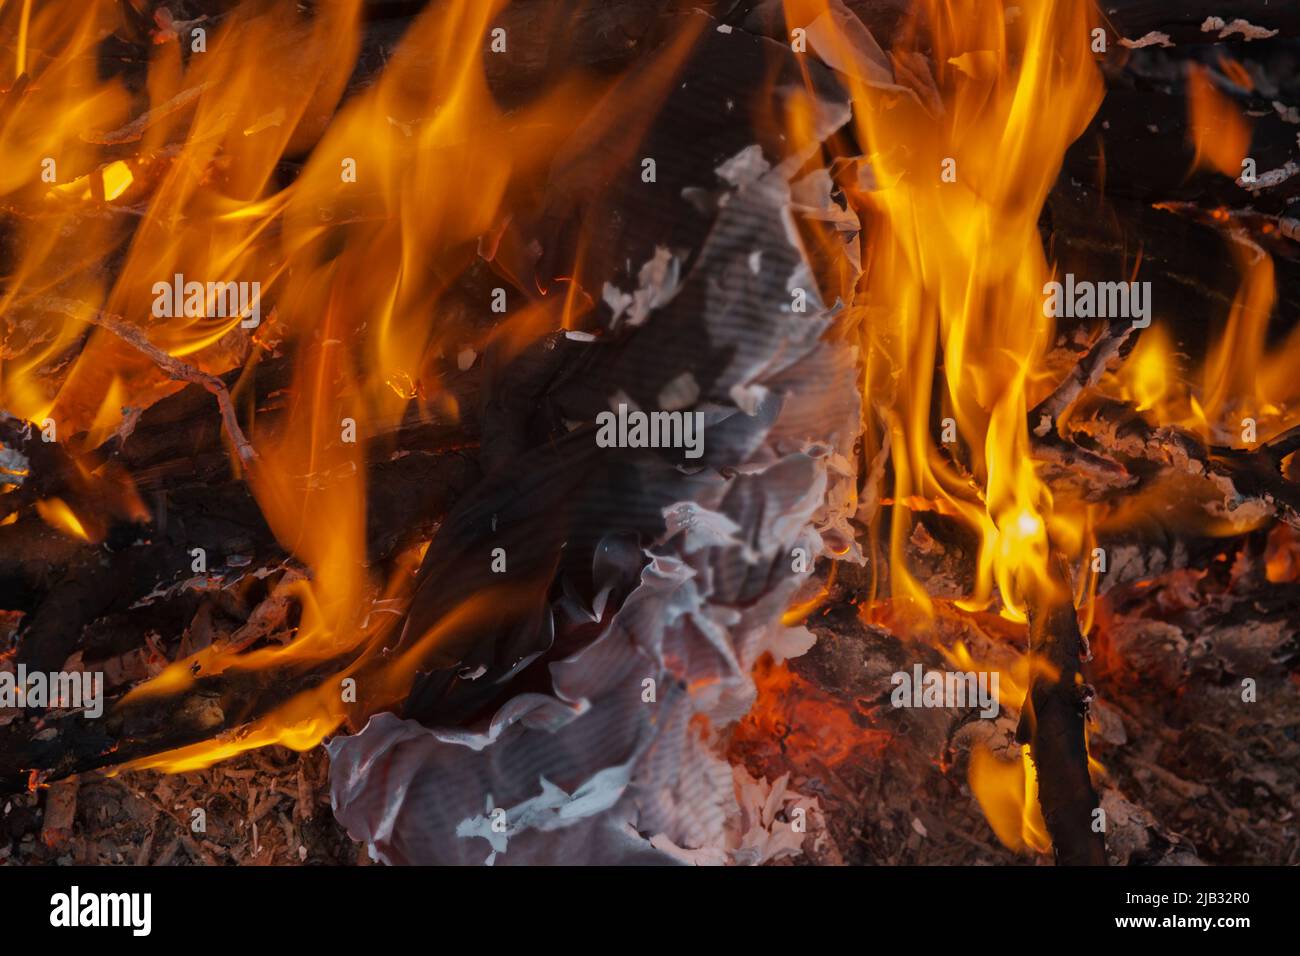 Bonfire. The flame of fire burns sheets of paper, books or documents. Elimination of evidence. Stock Photo